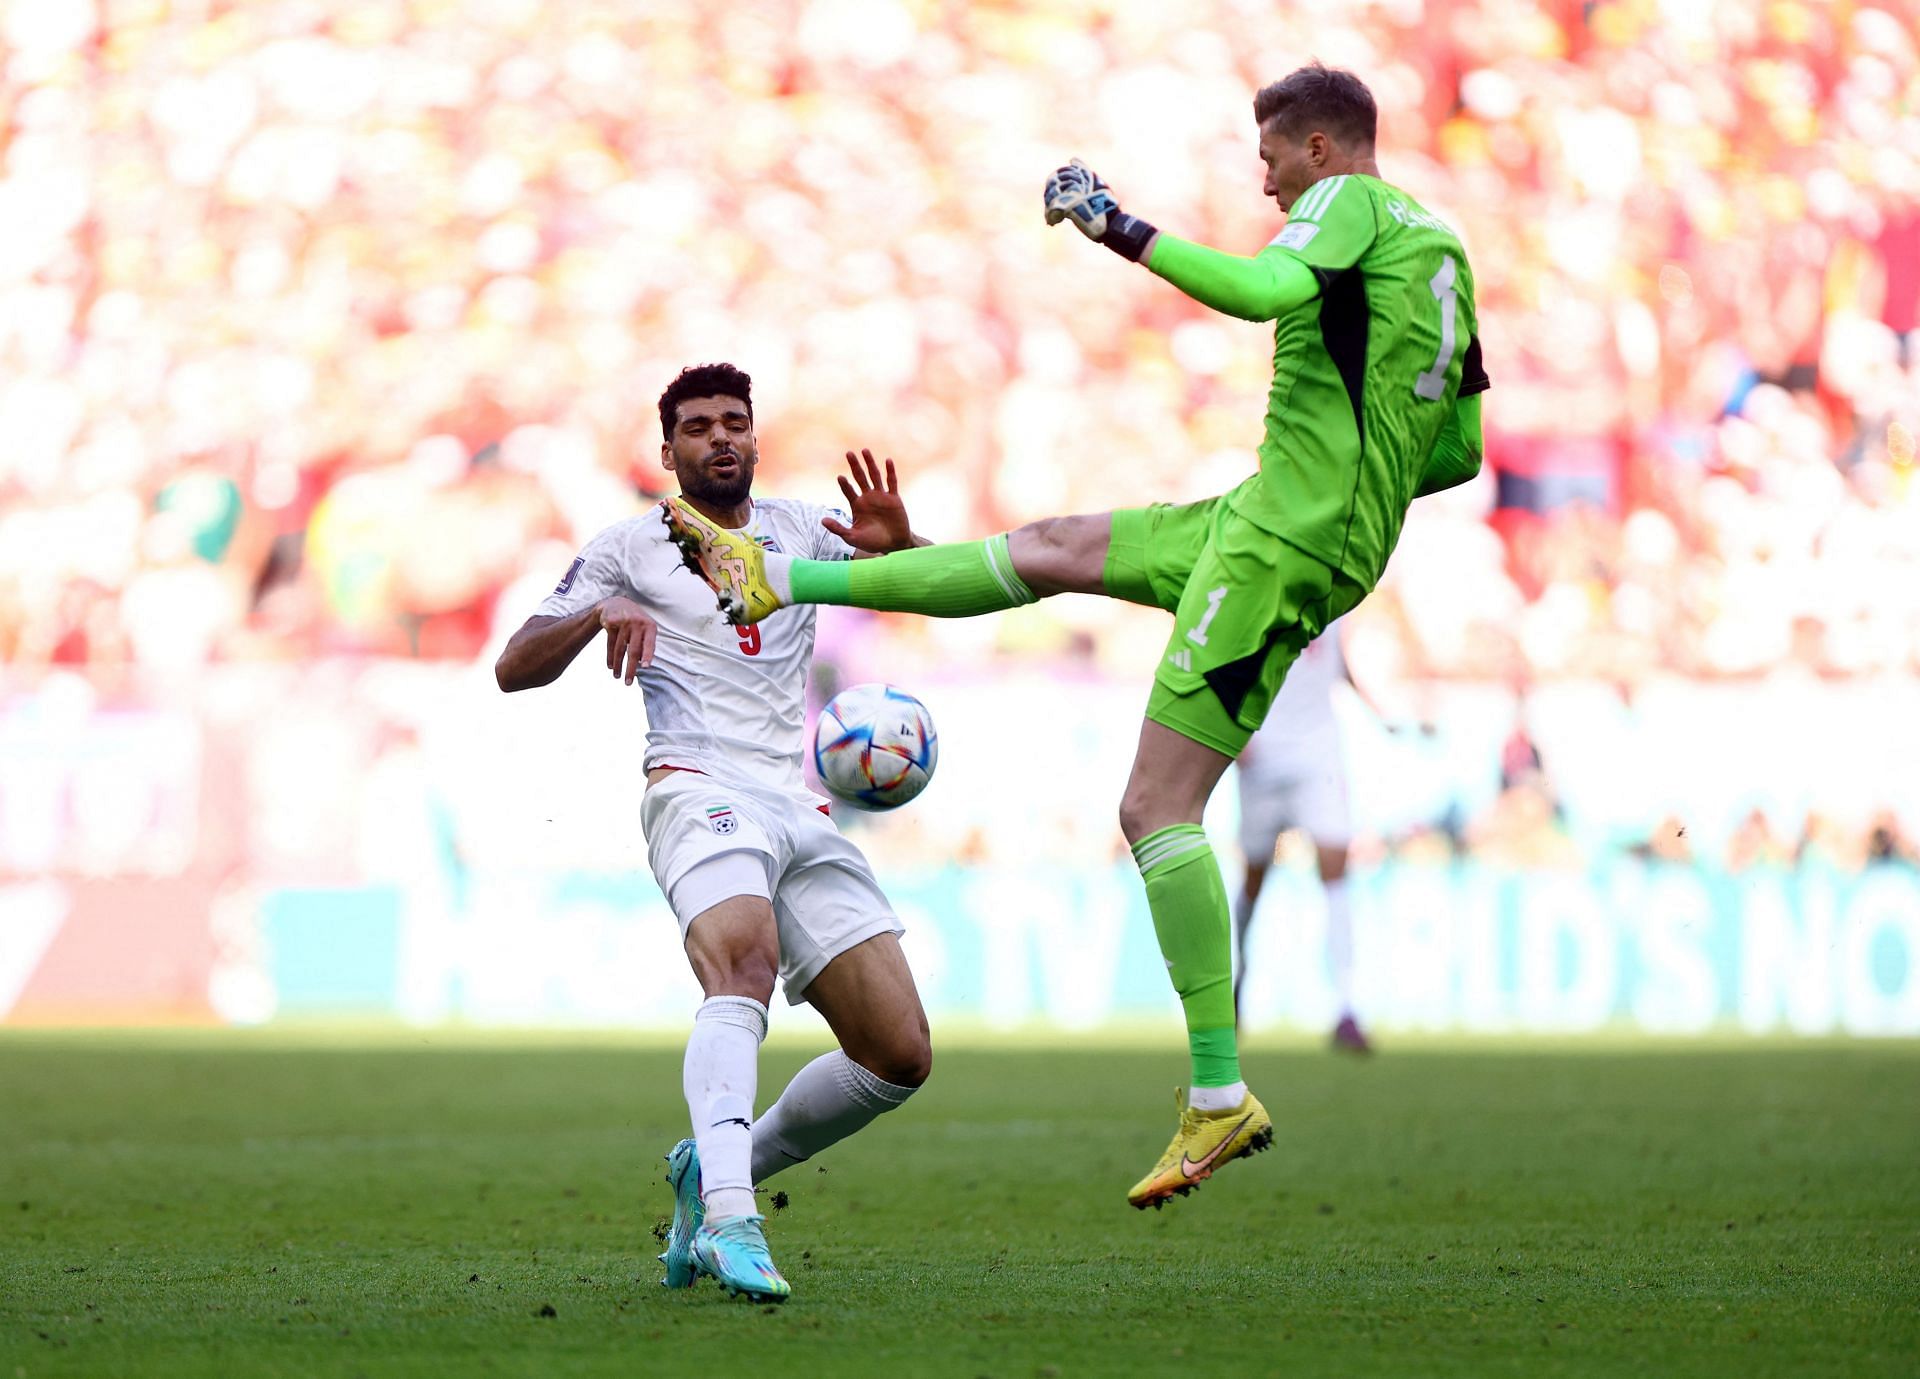 Wayne Hennessey's foul on Mehdi Taremi saw the goalkeeper pick up a red card.